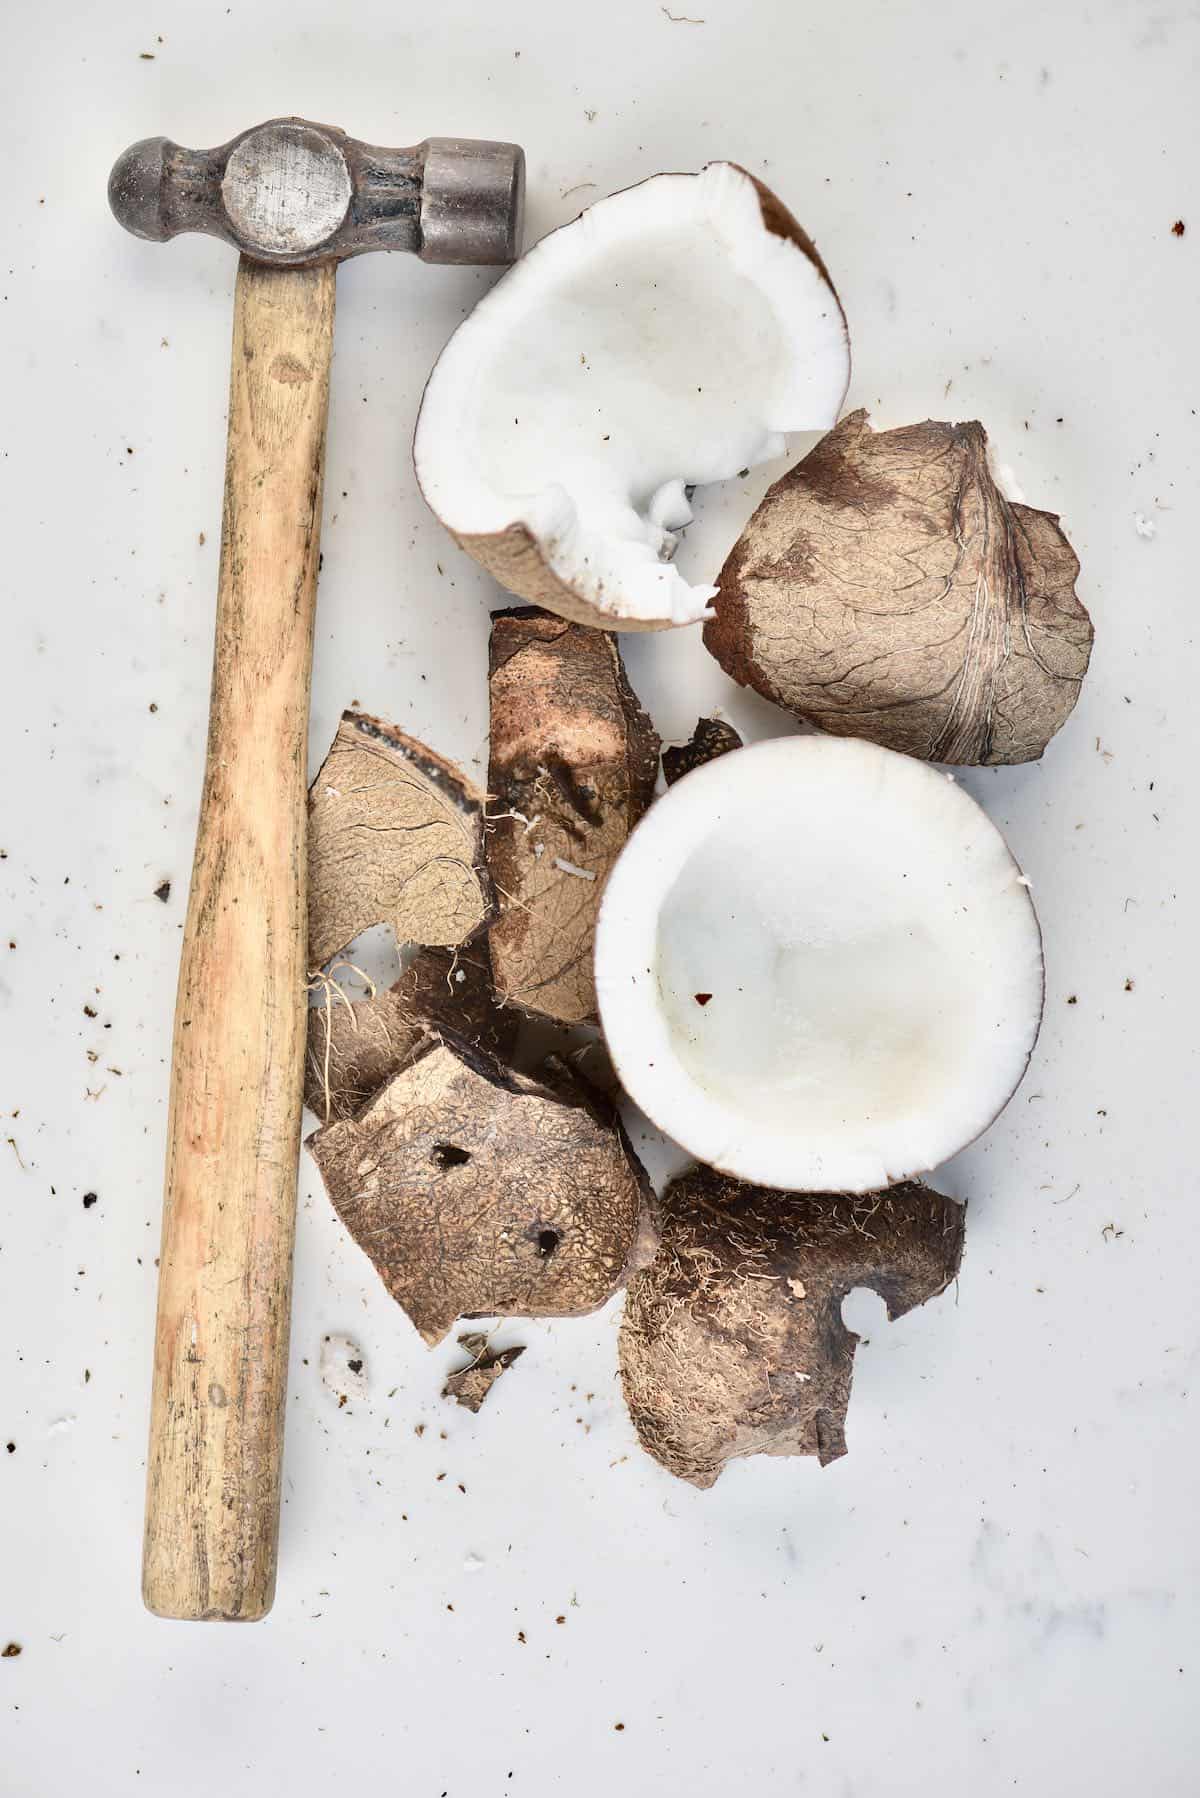 A coconut with broken shell and a hammer next to it